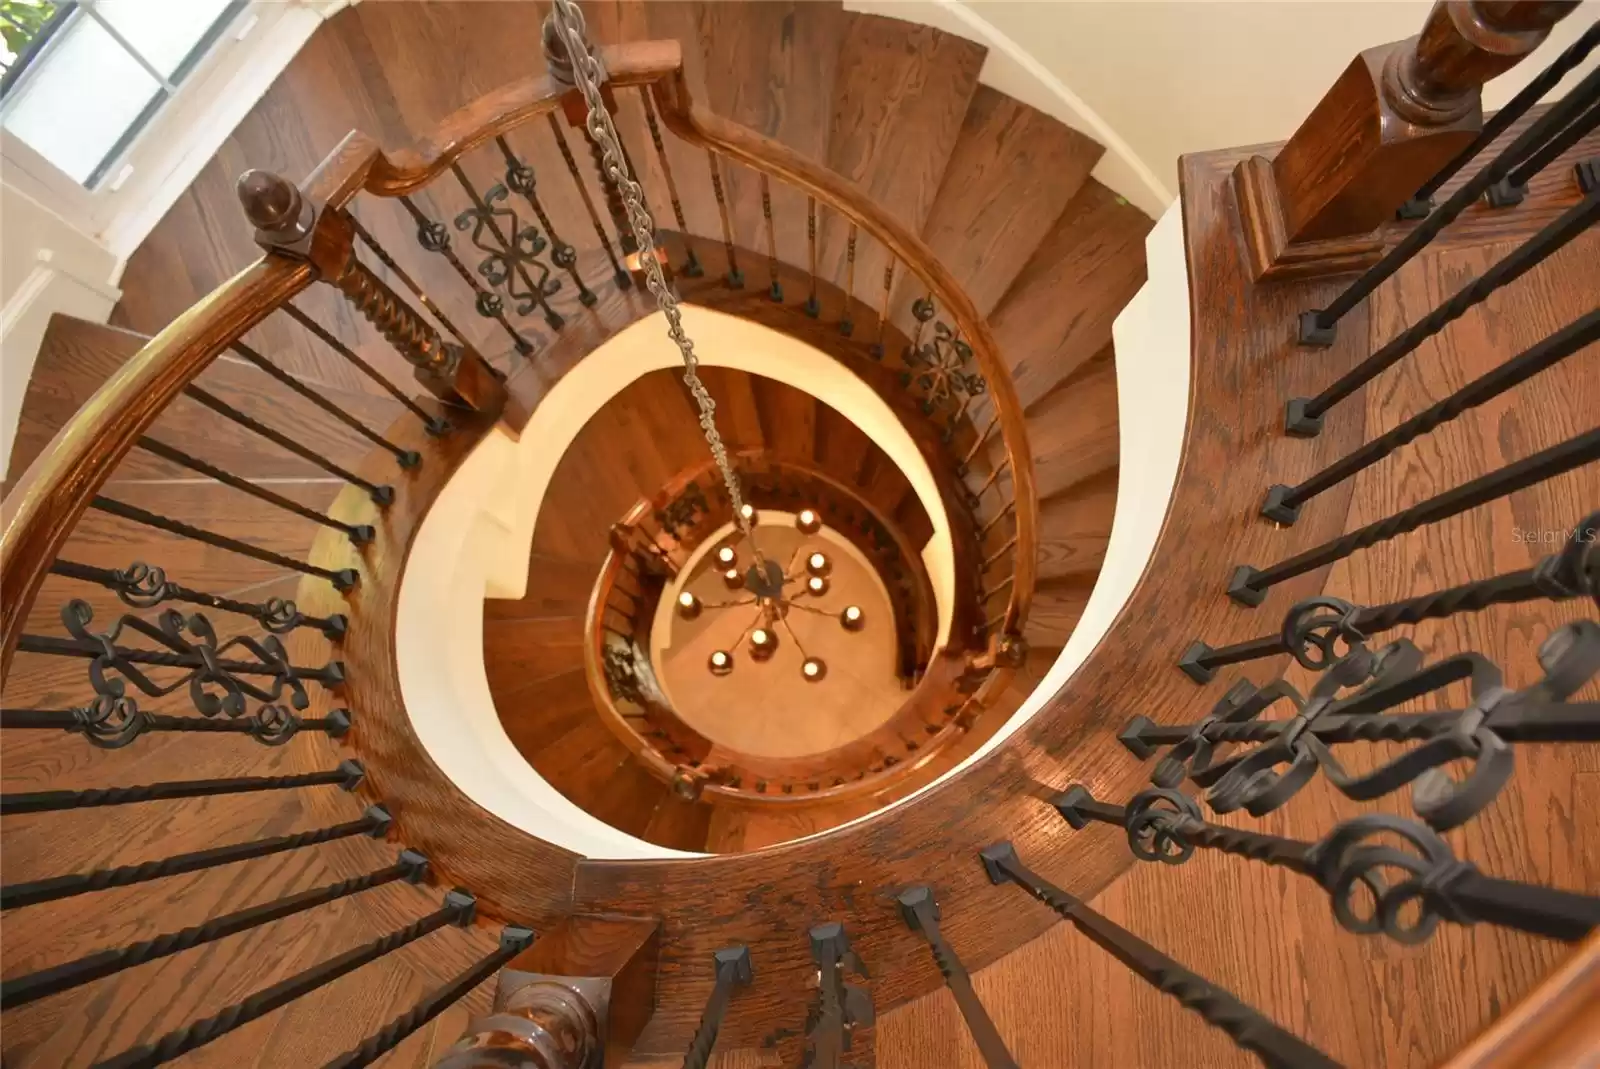 Elegant hardwood and wrought-iron spiral staircase rising to the top of the turret.